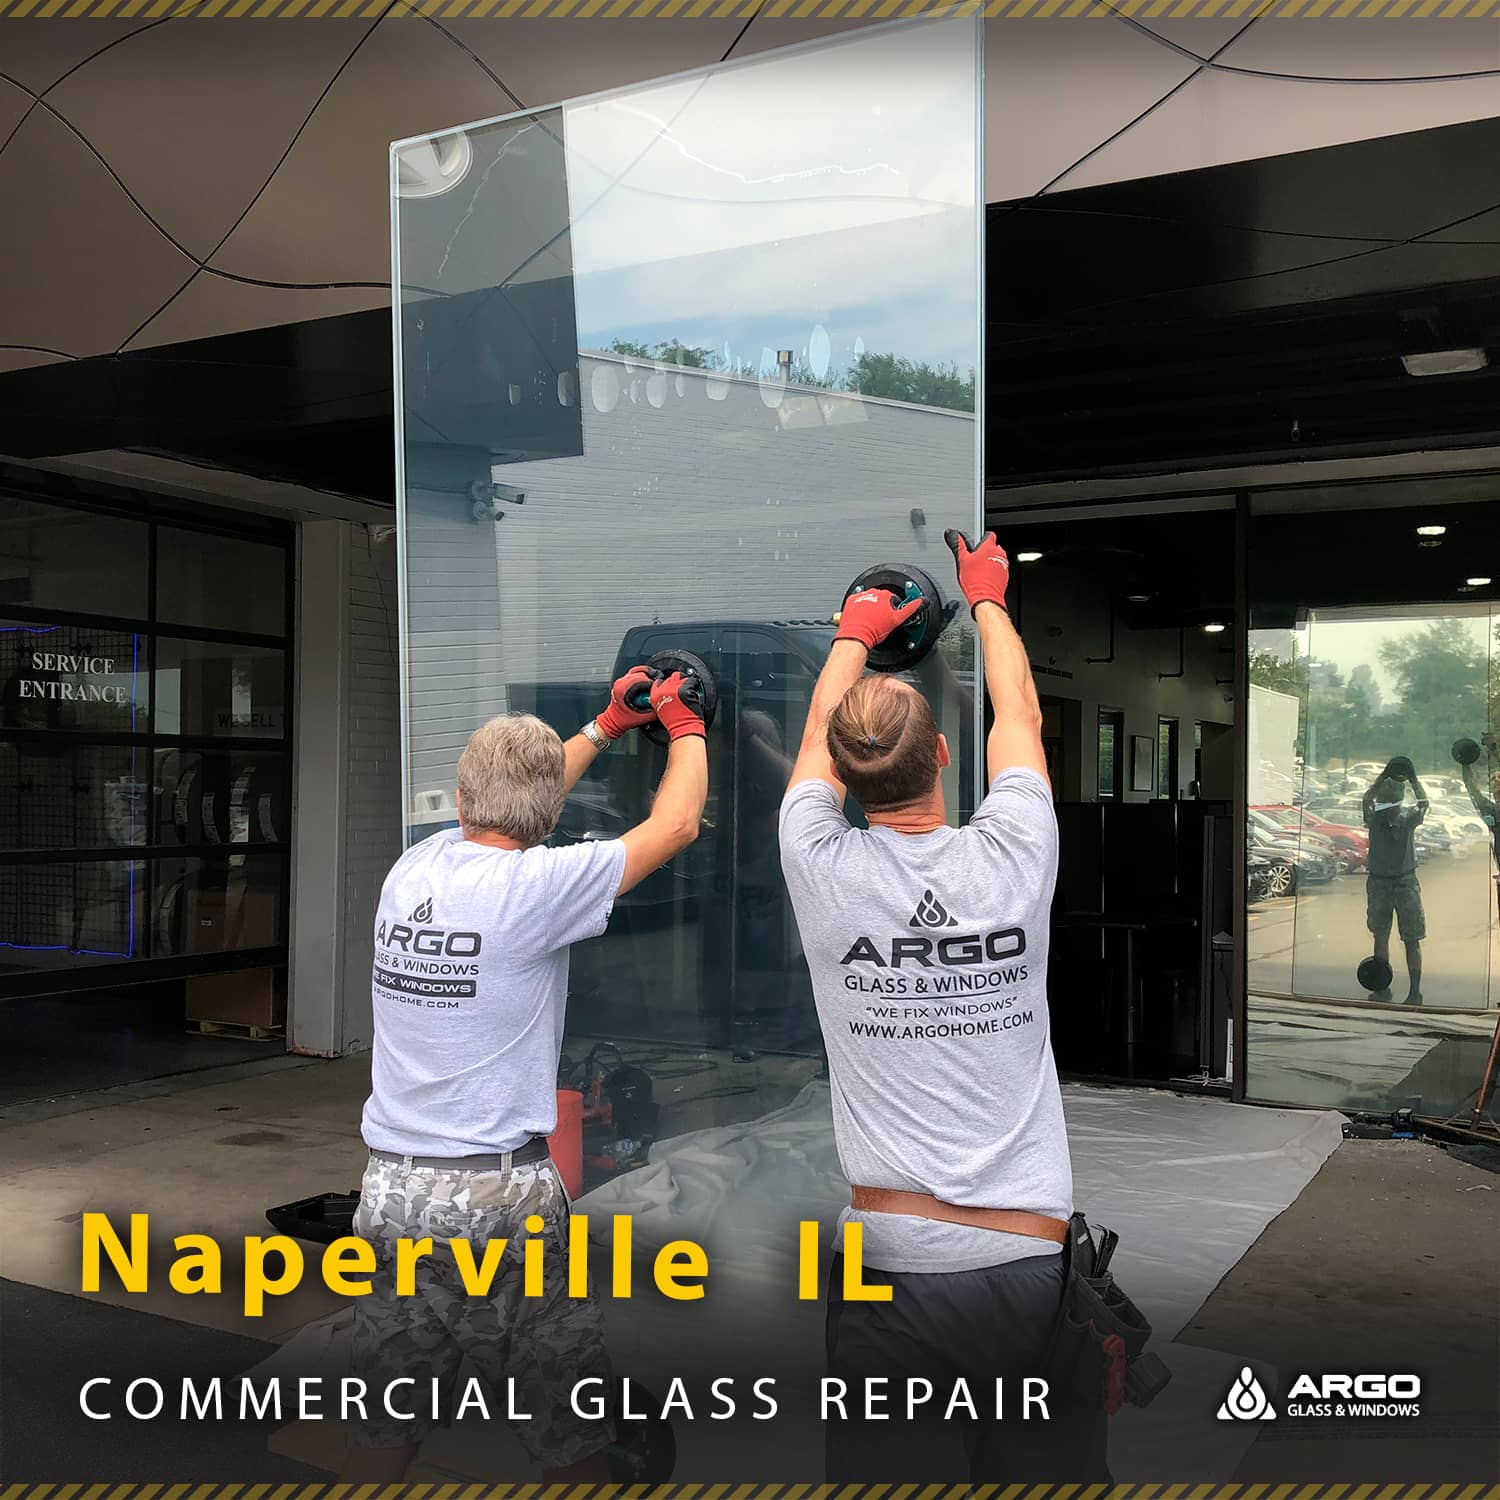 Professional Commercial Glass Repair company